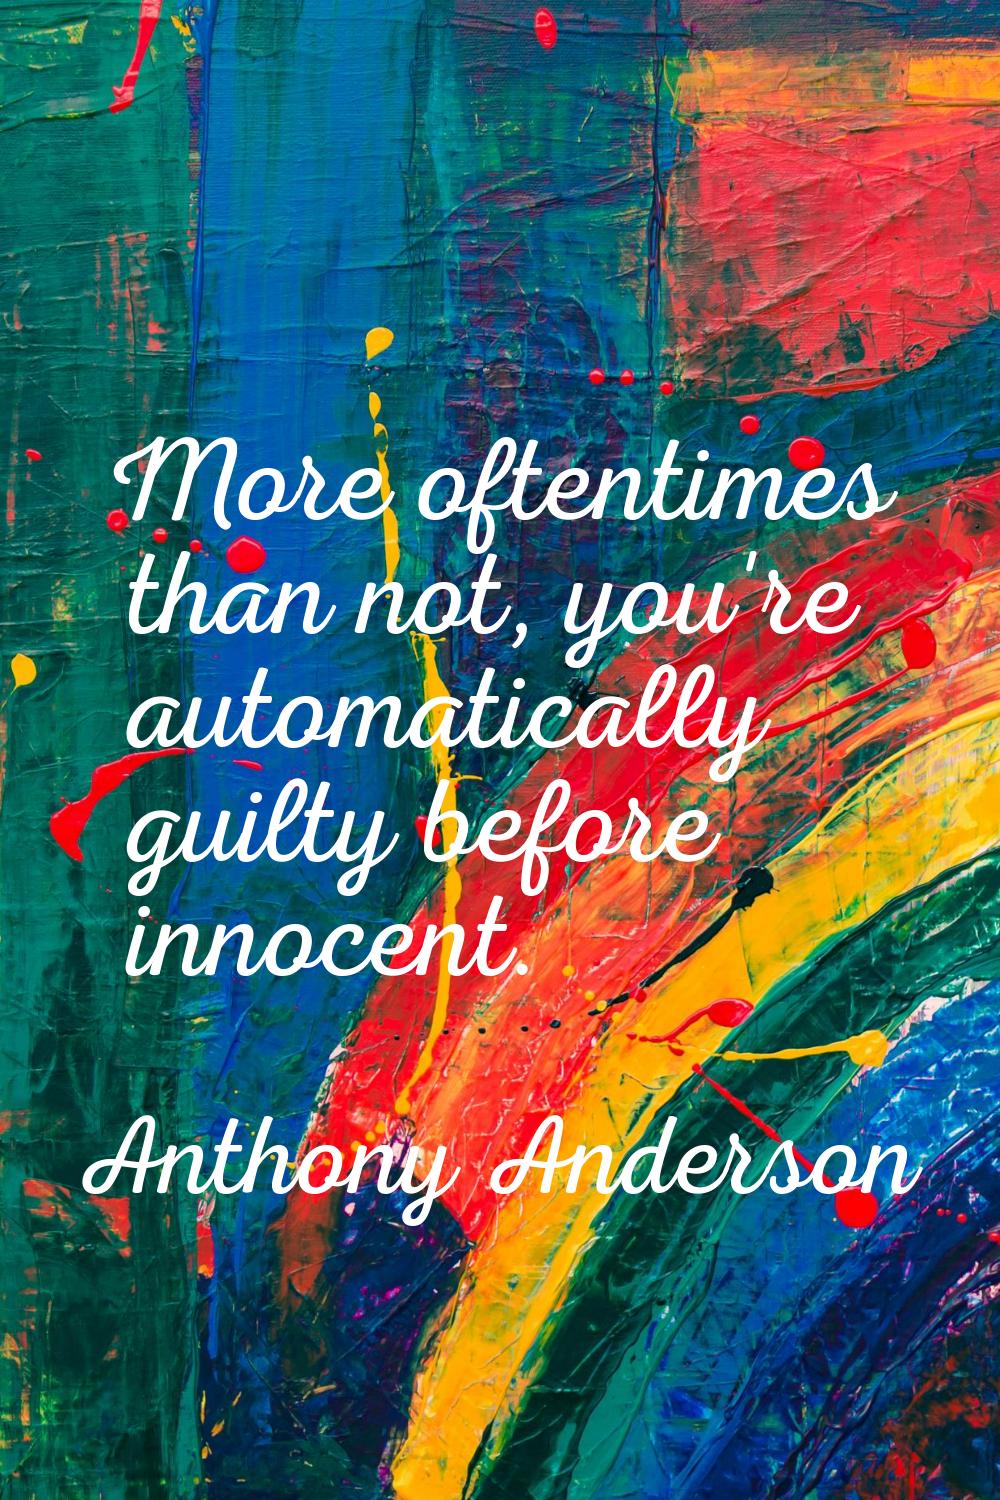 More oftentimes than not, you're automatically guilty before innocent.